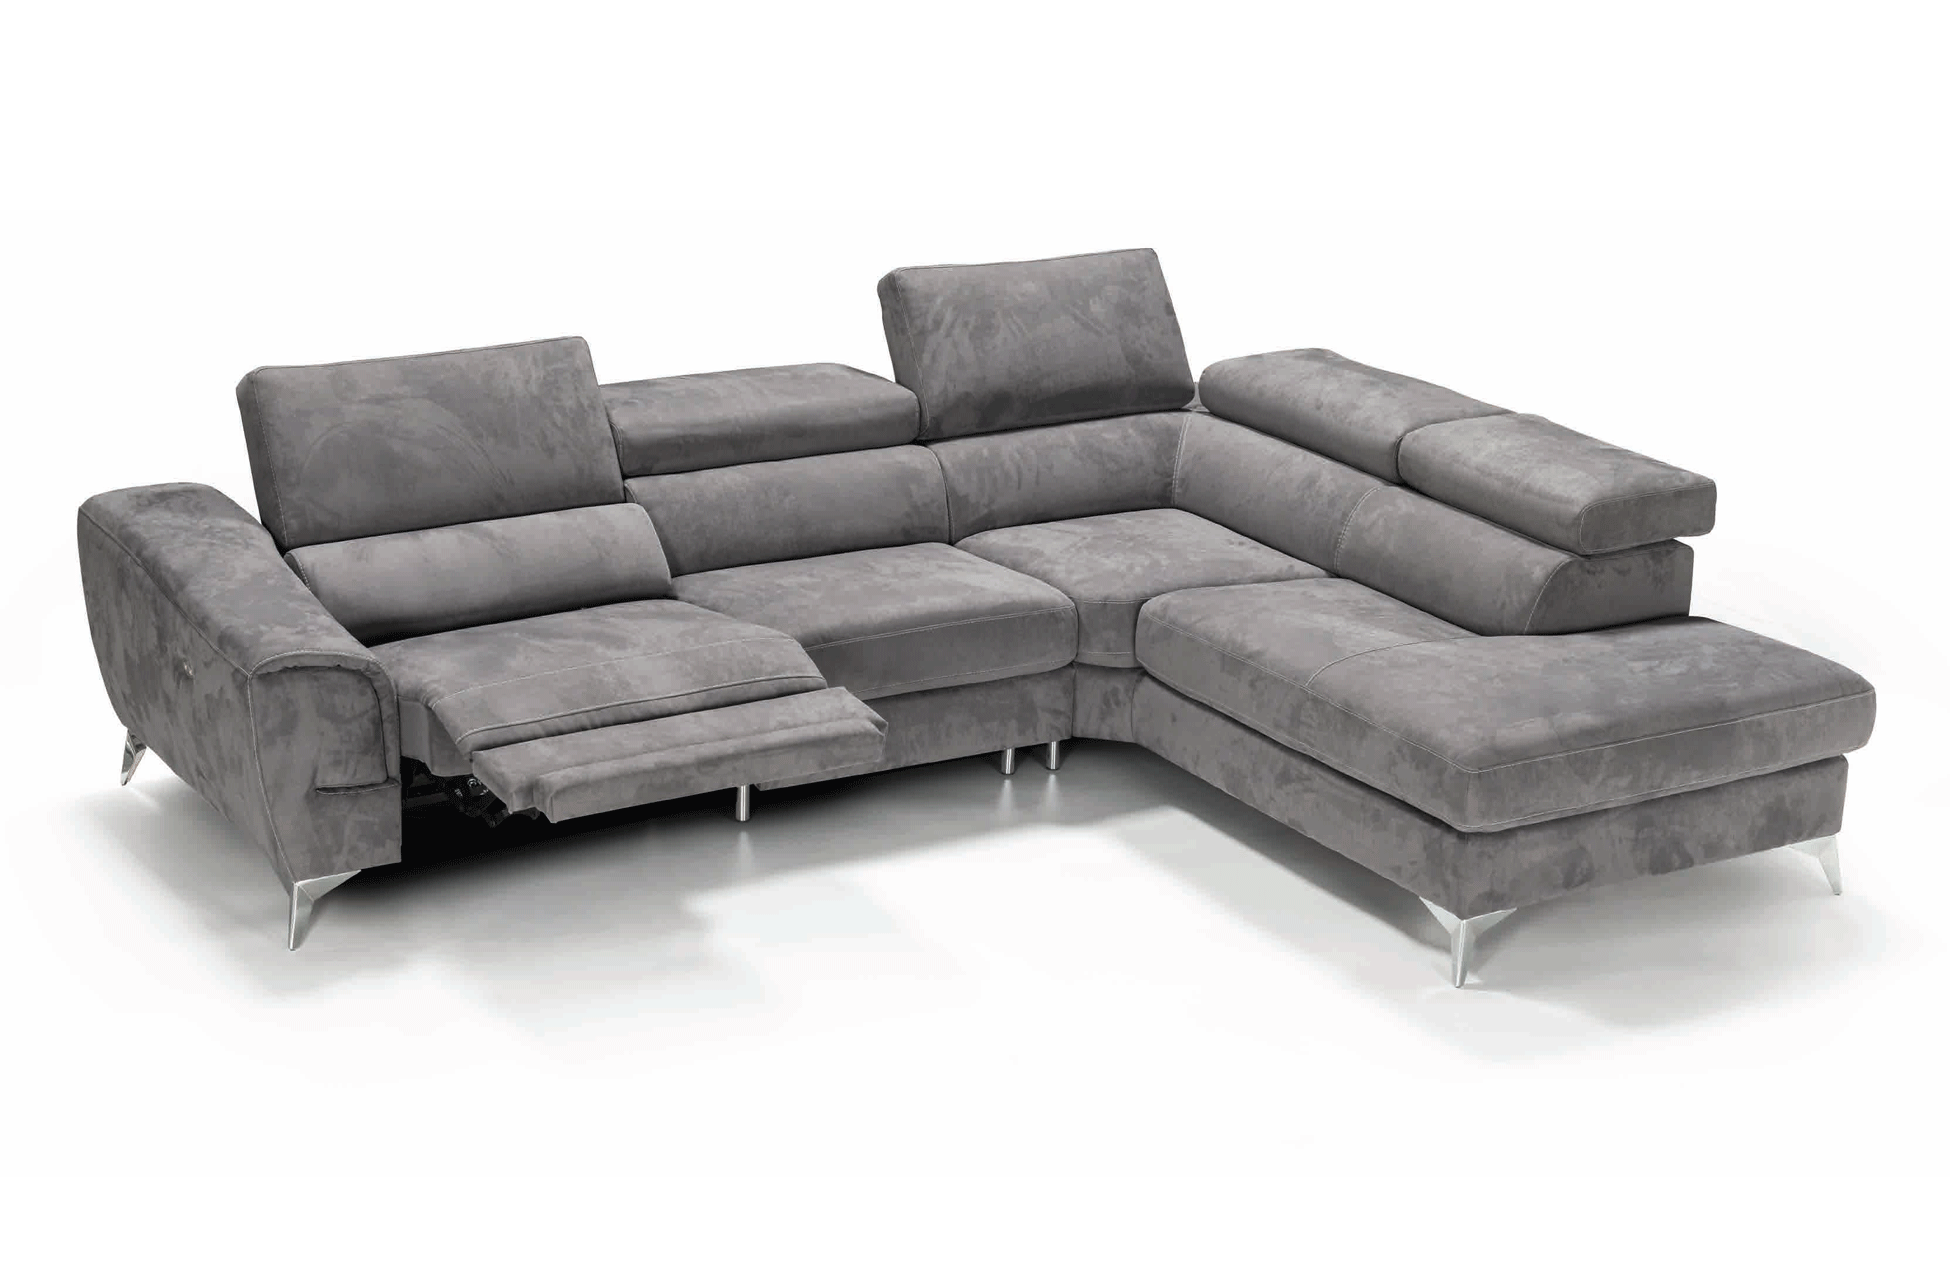 Living Room Furniture Reclining and Sliding Seats Sets Perseo Living room